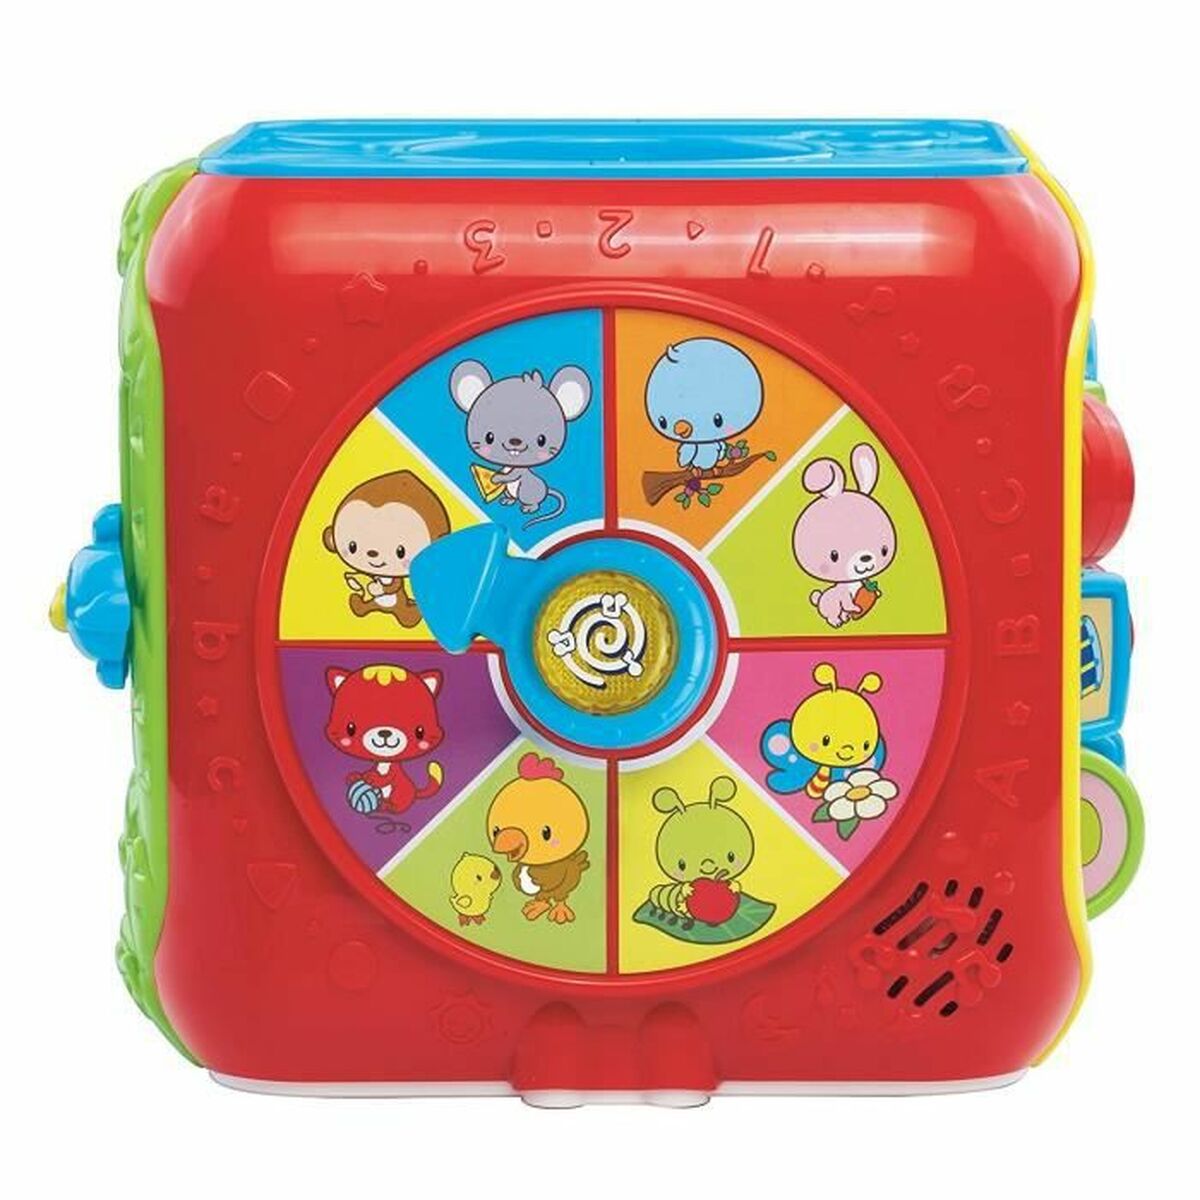 Interactive Toy for Babies Vtech Baby Super Cube of the Discoveries